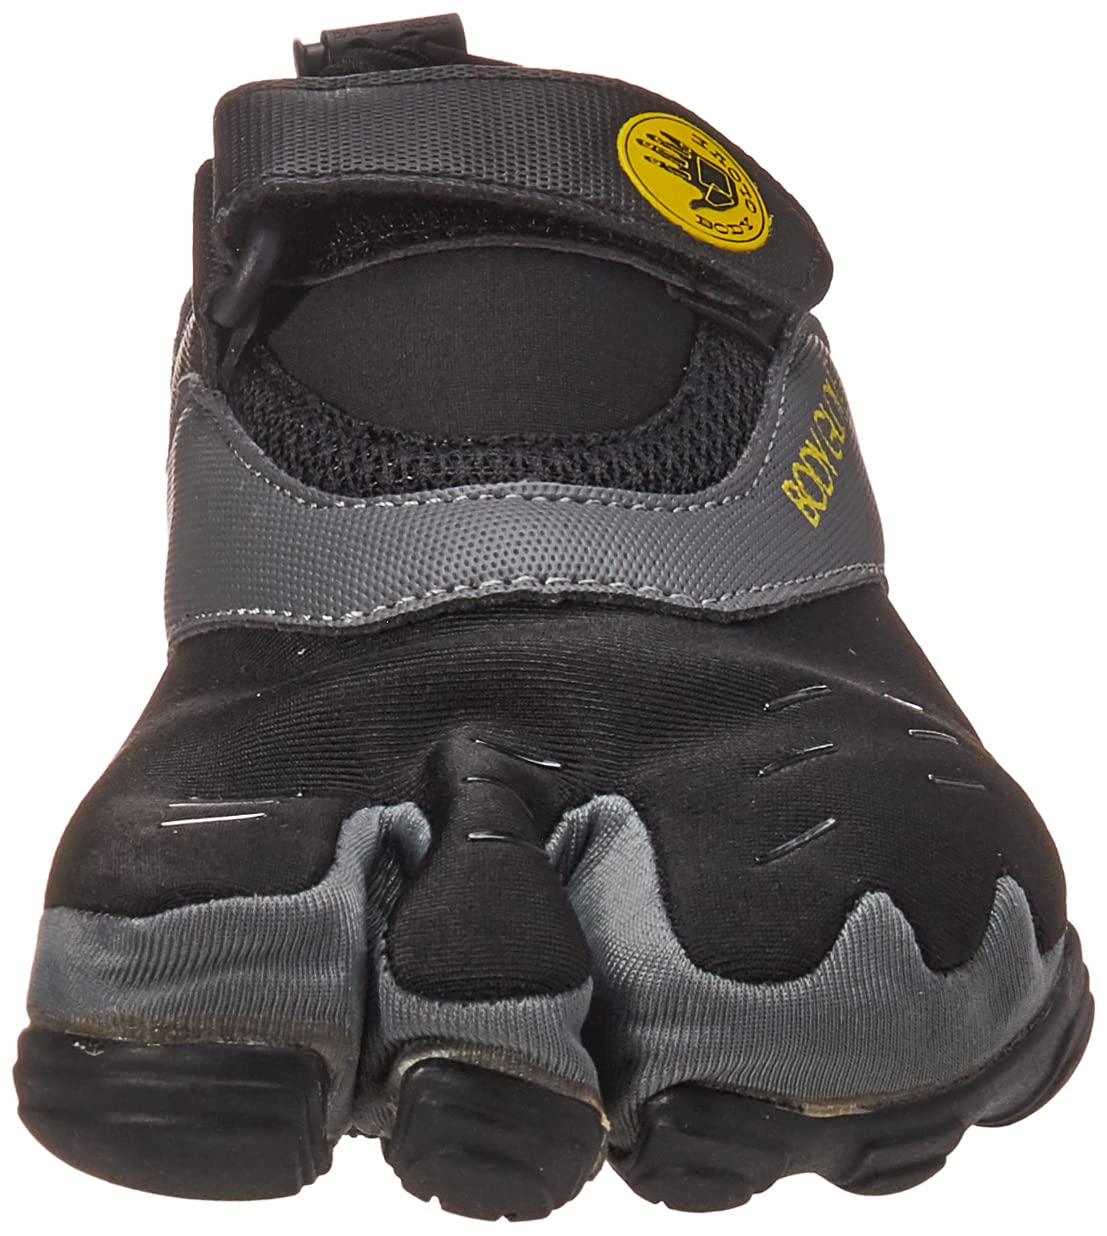 3T BAREFOOT MAX Water Shoe